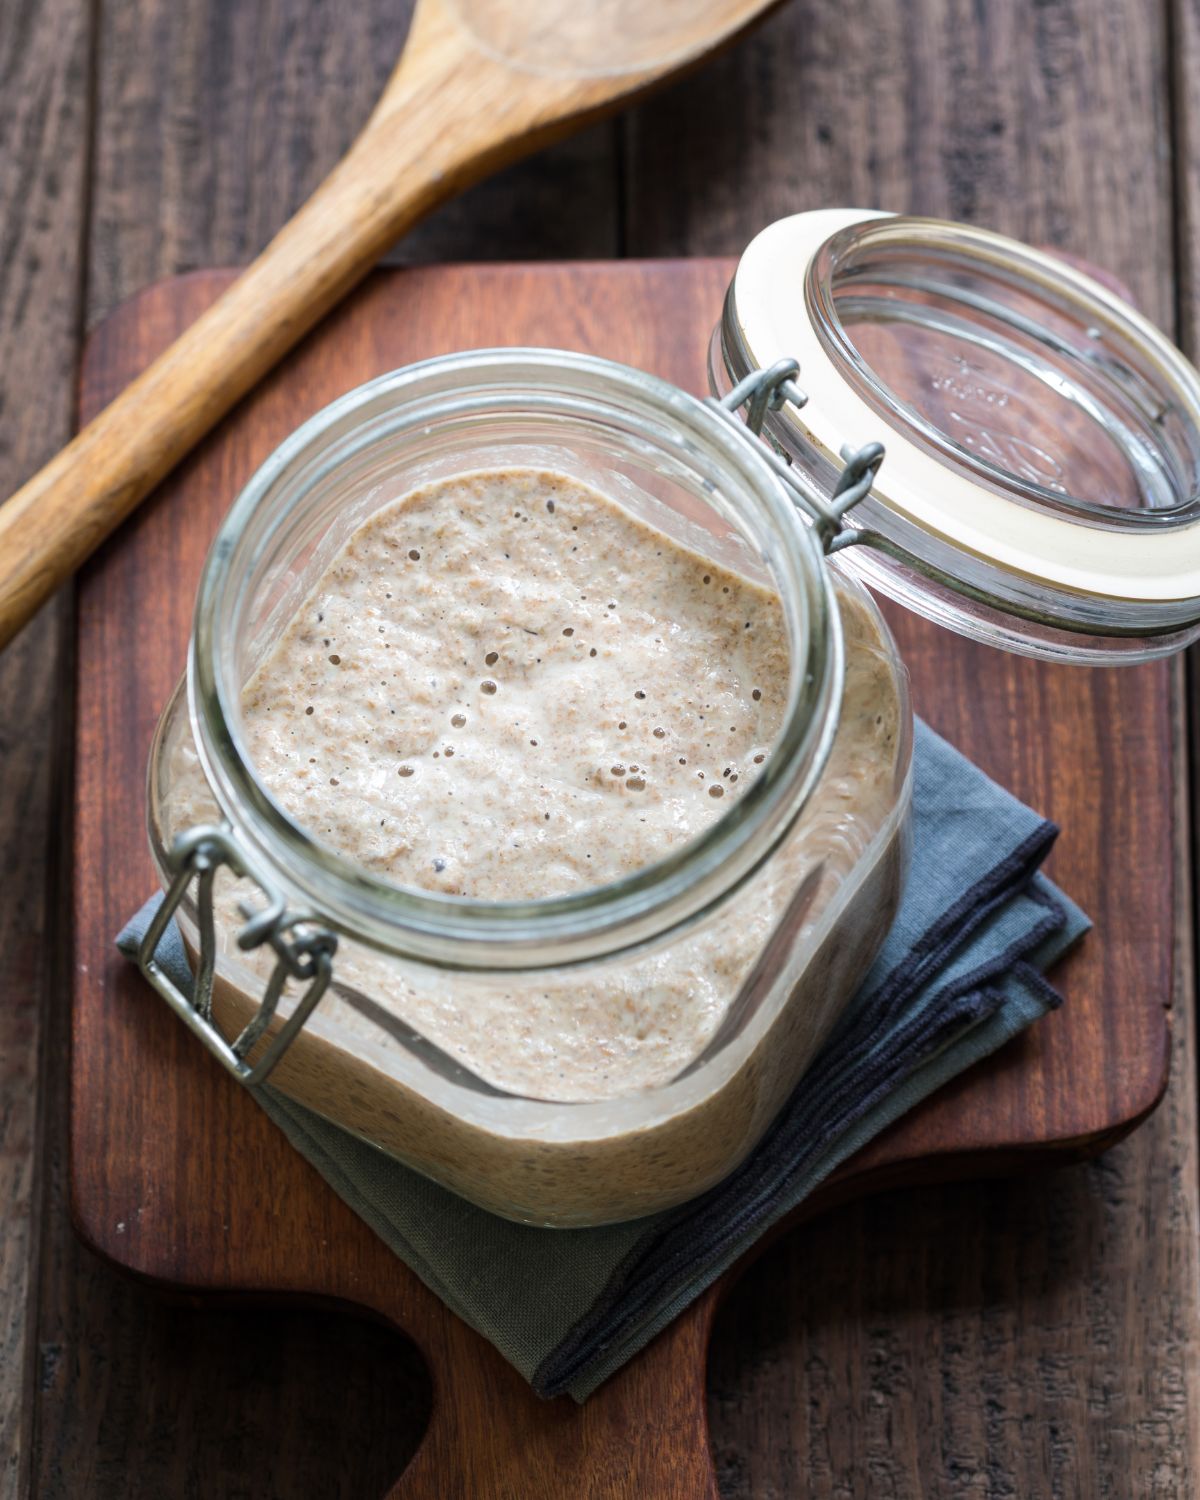 Gluten-Free Sourdough Starter: How to Make and Maintain It